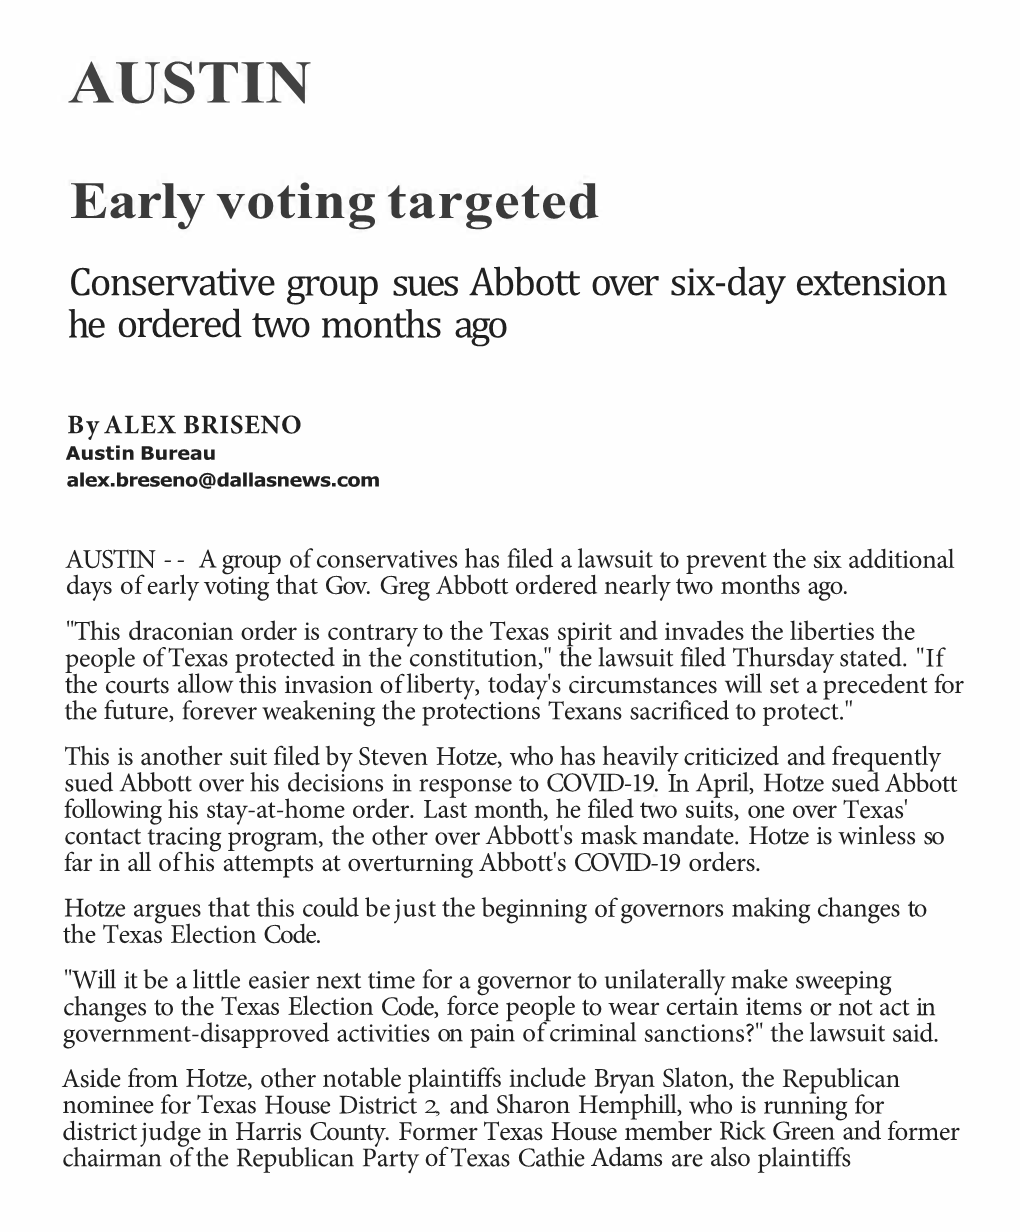 AUSTIN Early Voting Targeted